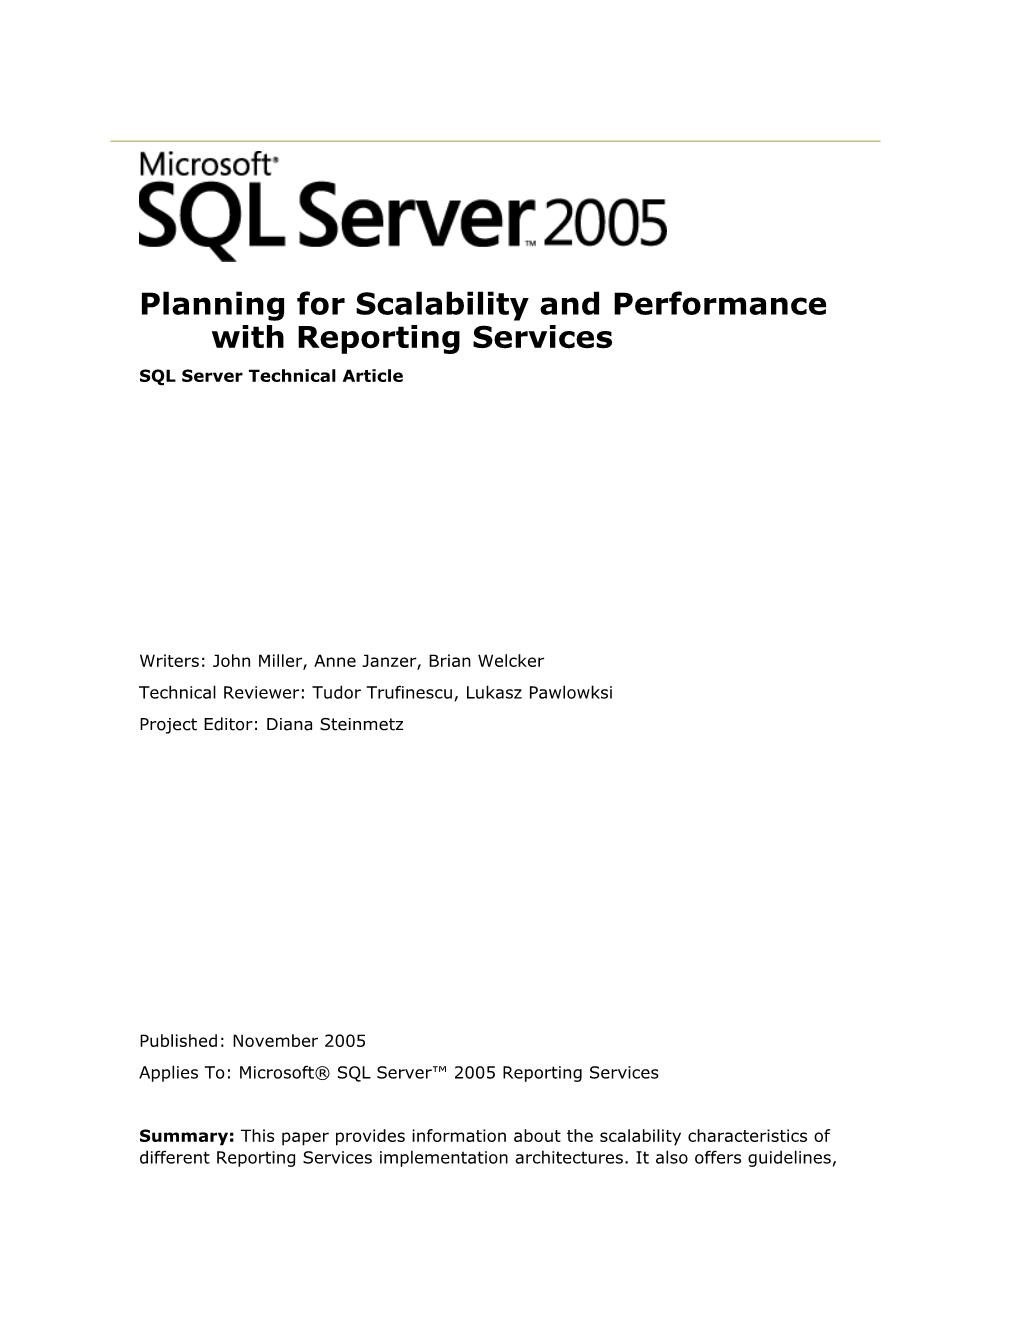 Planning for Scalability and Performance with Reporting Services